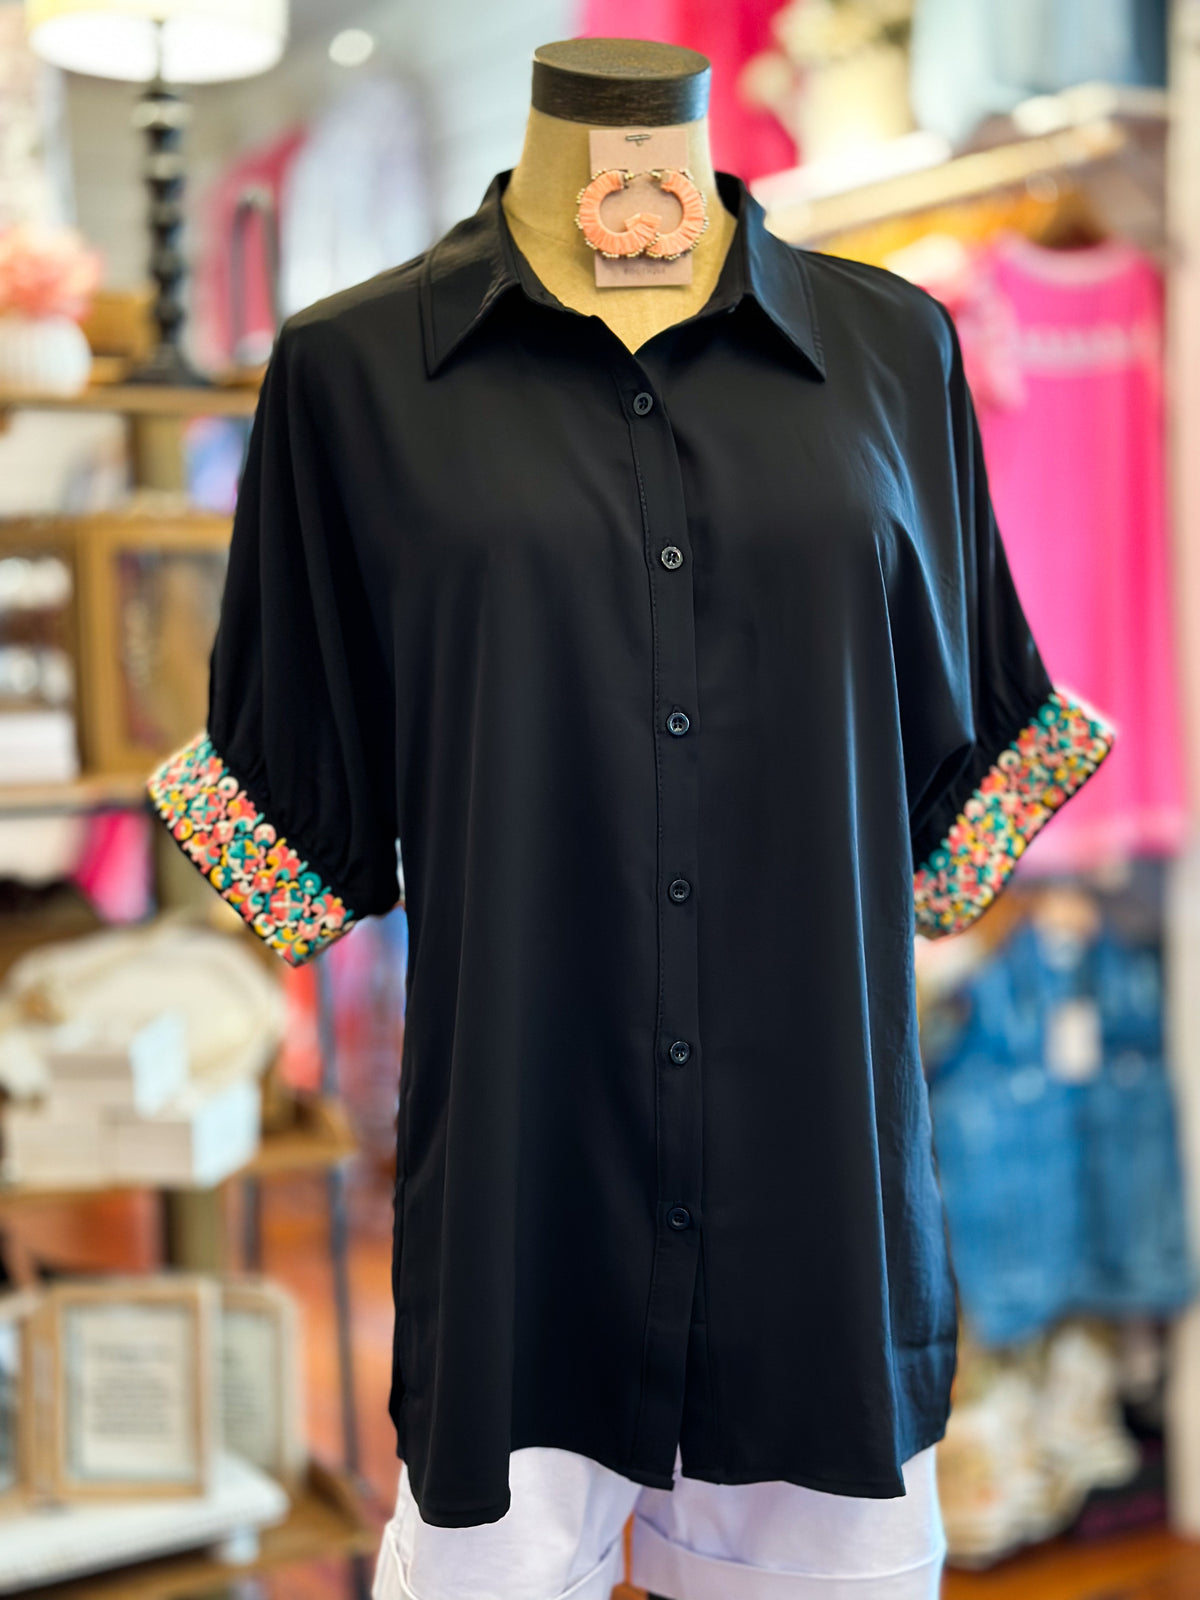 black washco britton top with colorful embroidery details on sleeves